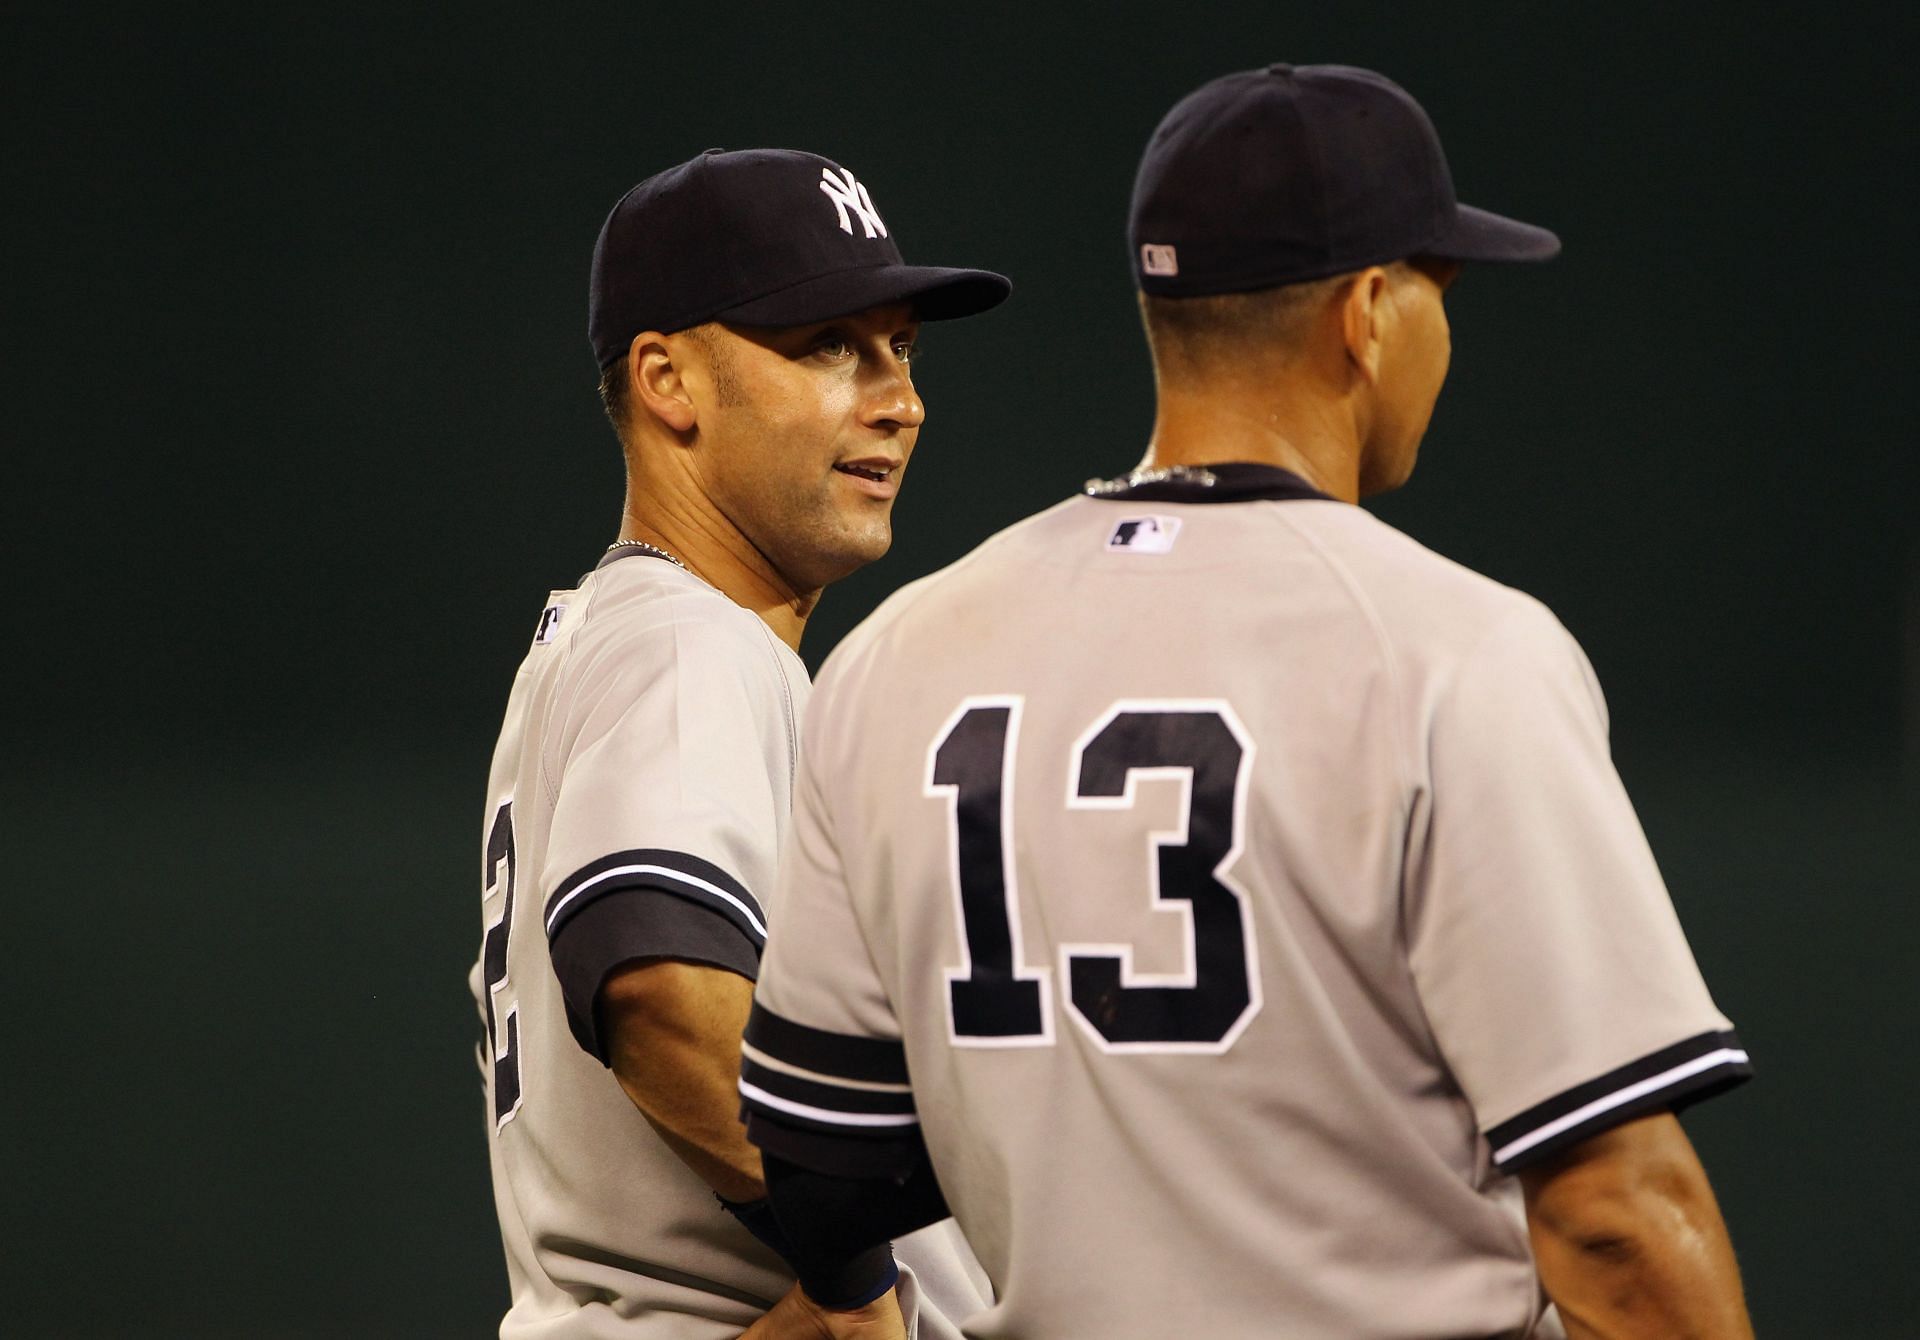 Welcome to Twitter, Captain! - Alex Rodriguez congratulates former  teammate Derek Jeter on social media debut, fans can't help but remember  glory days